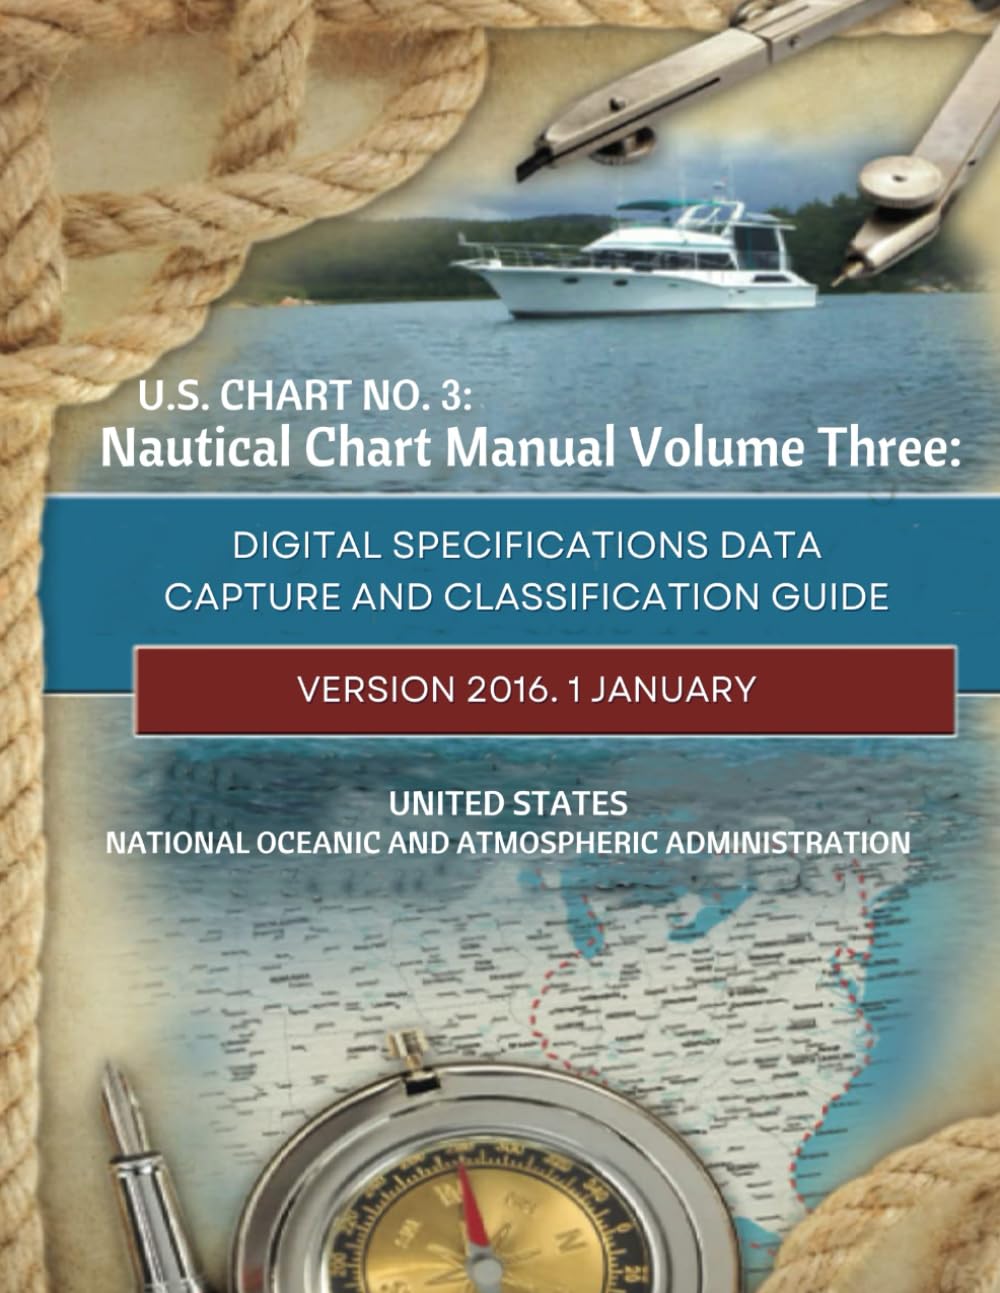 U.S. Chart No. 3 Nautical Chart Manual Volume Three: Digital Specifications Data Capture And Classification Guide Version 2016.1 January (Navigational Charting Essentials Series, Band 3)